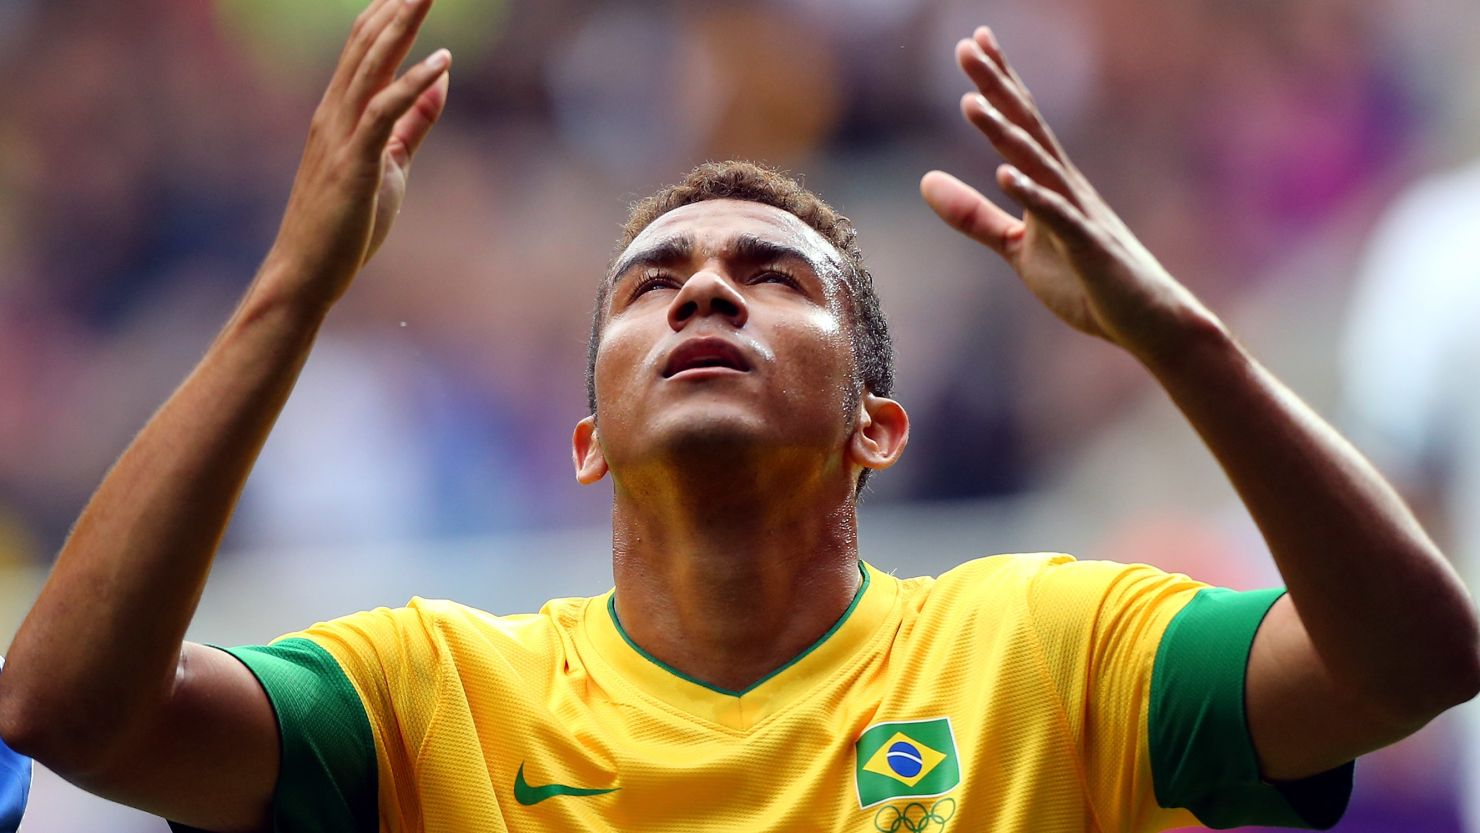 Midfielder Danilo reacts after scoring Brazil's opening goal against New Zealand at St James' Park in Newcastle.